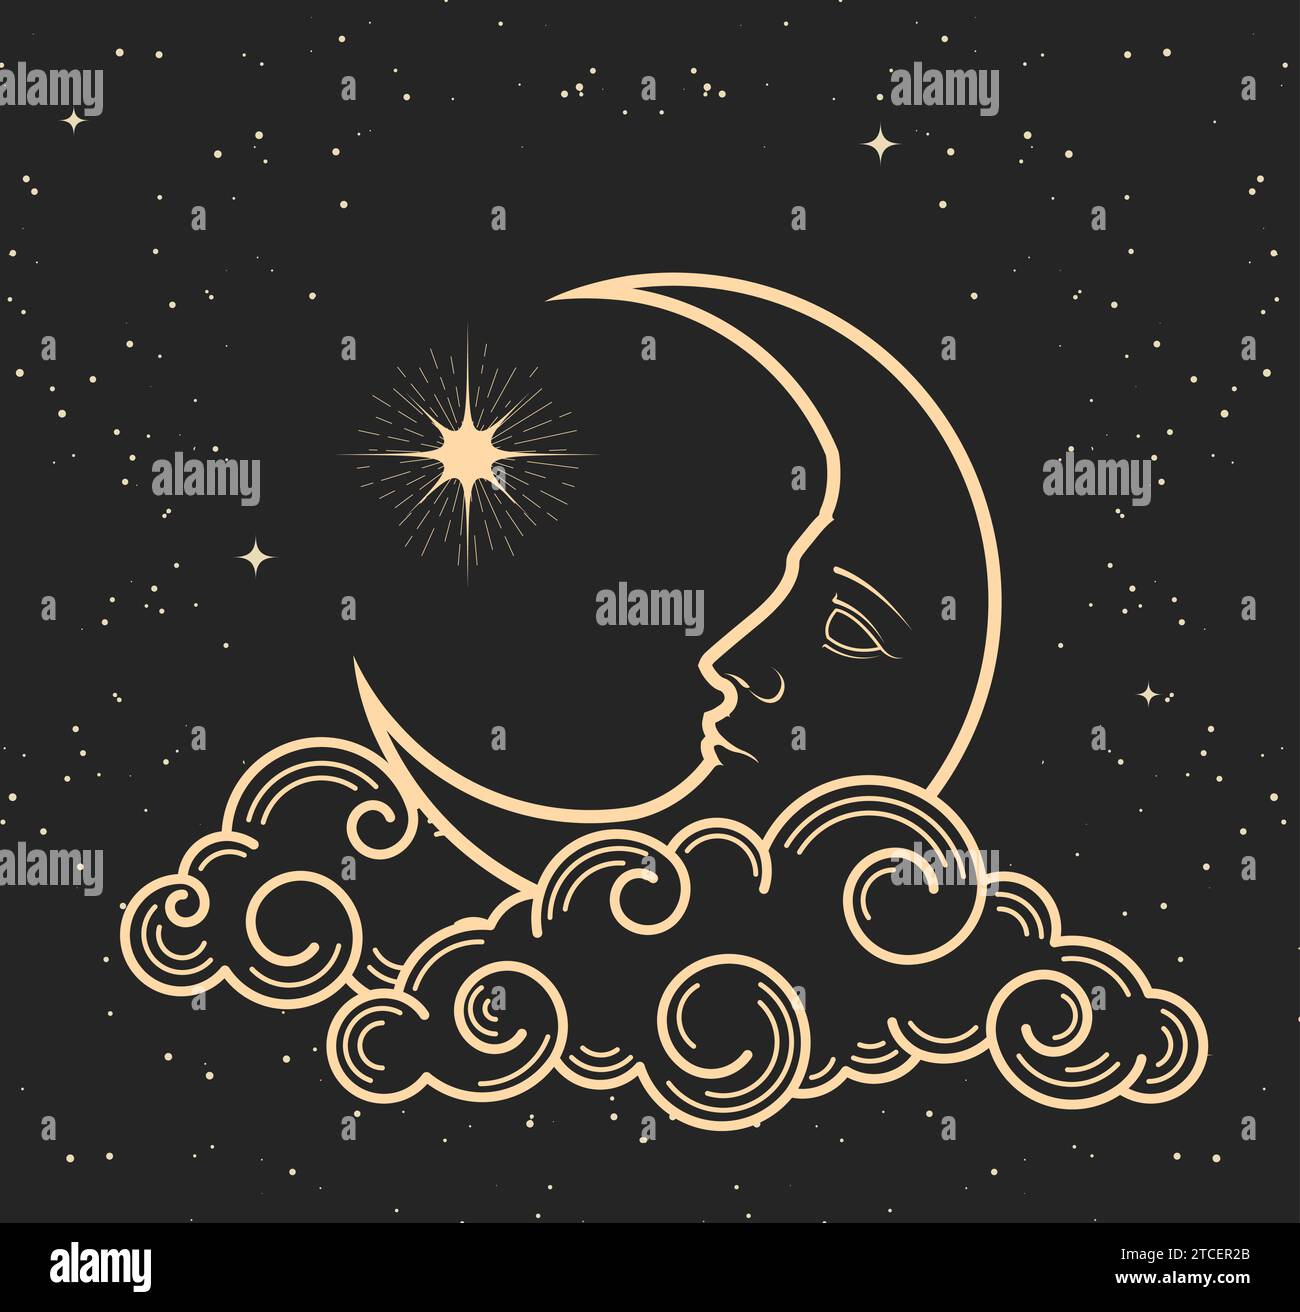 Mystic half-moon with face sleeps on clouds, crescent and guiding pole star, tarot style magic astrology symbol, vector Stock Vector